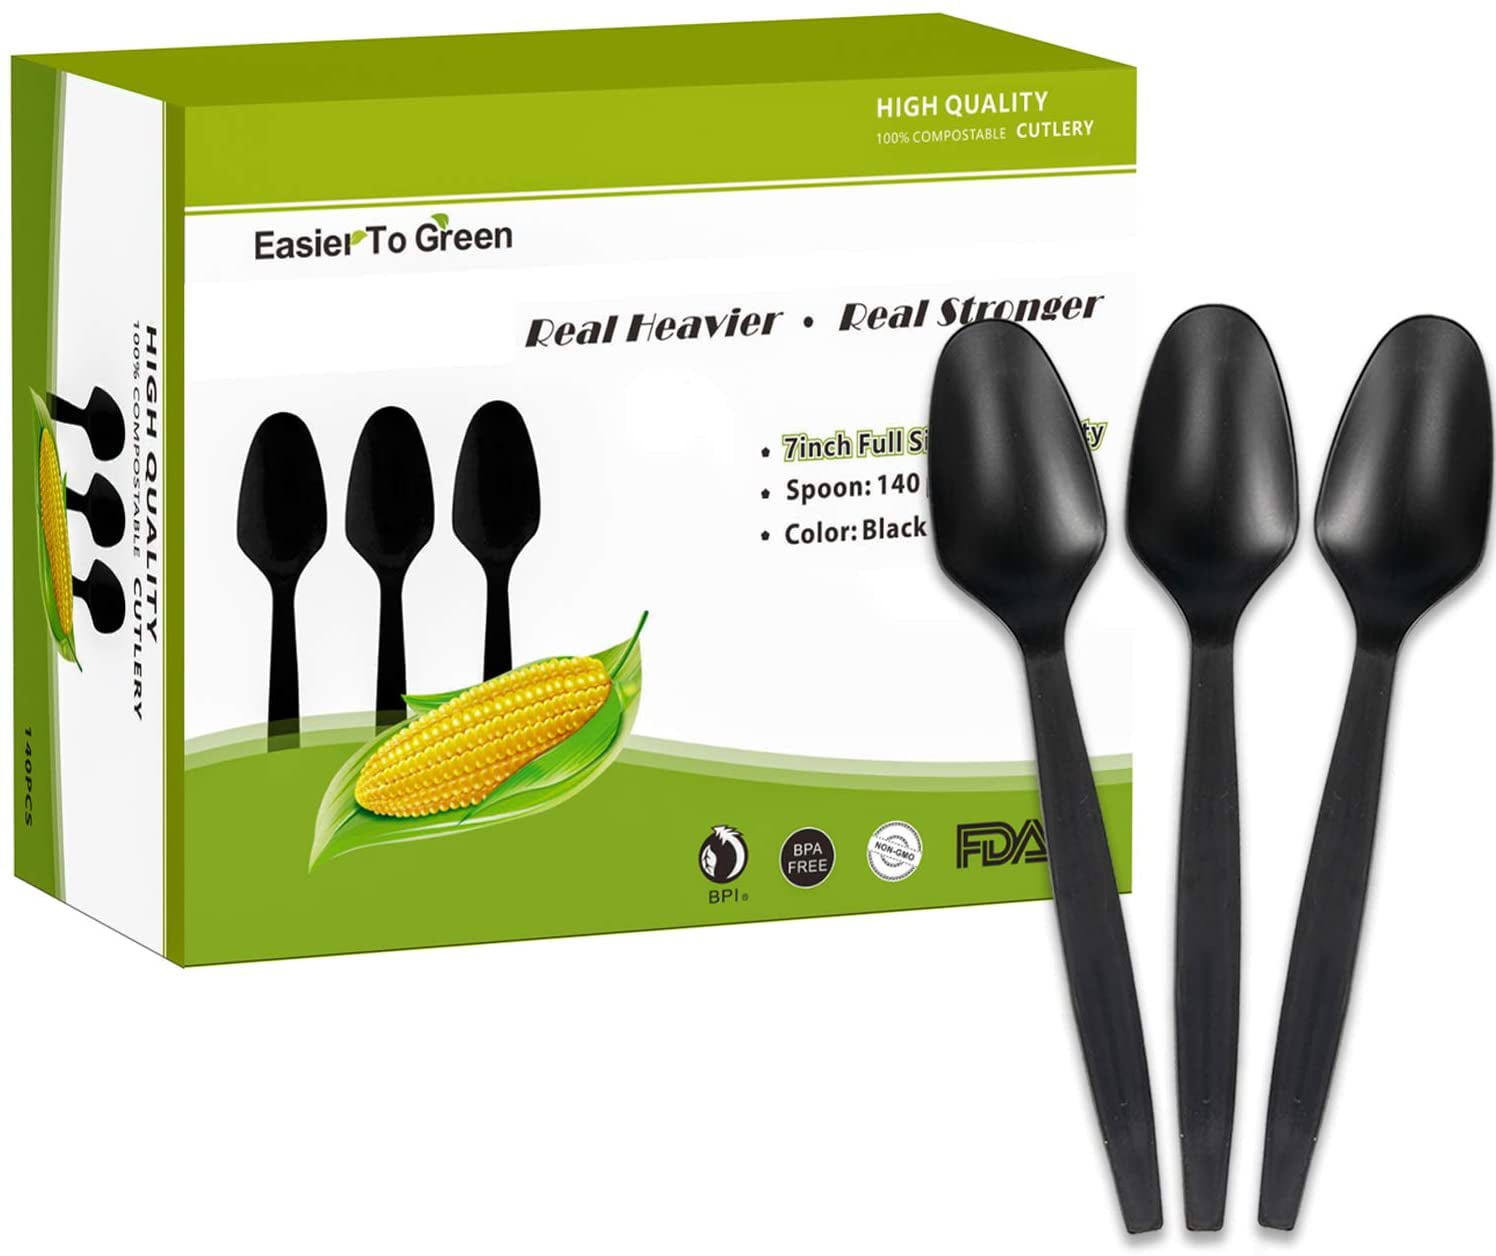 Eco-Friendly White Plastic Forks Biodegradable Cutlery Value Pack by Avant Grub 